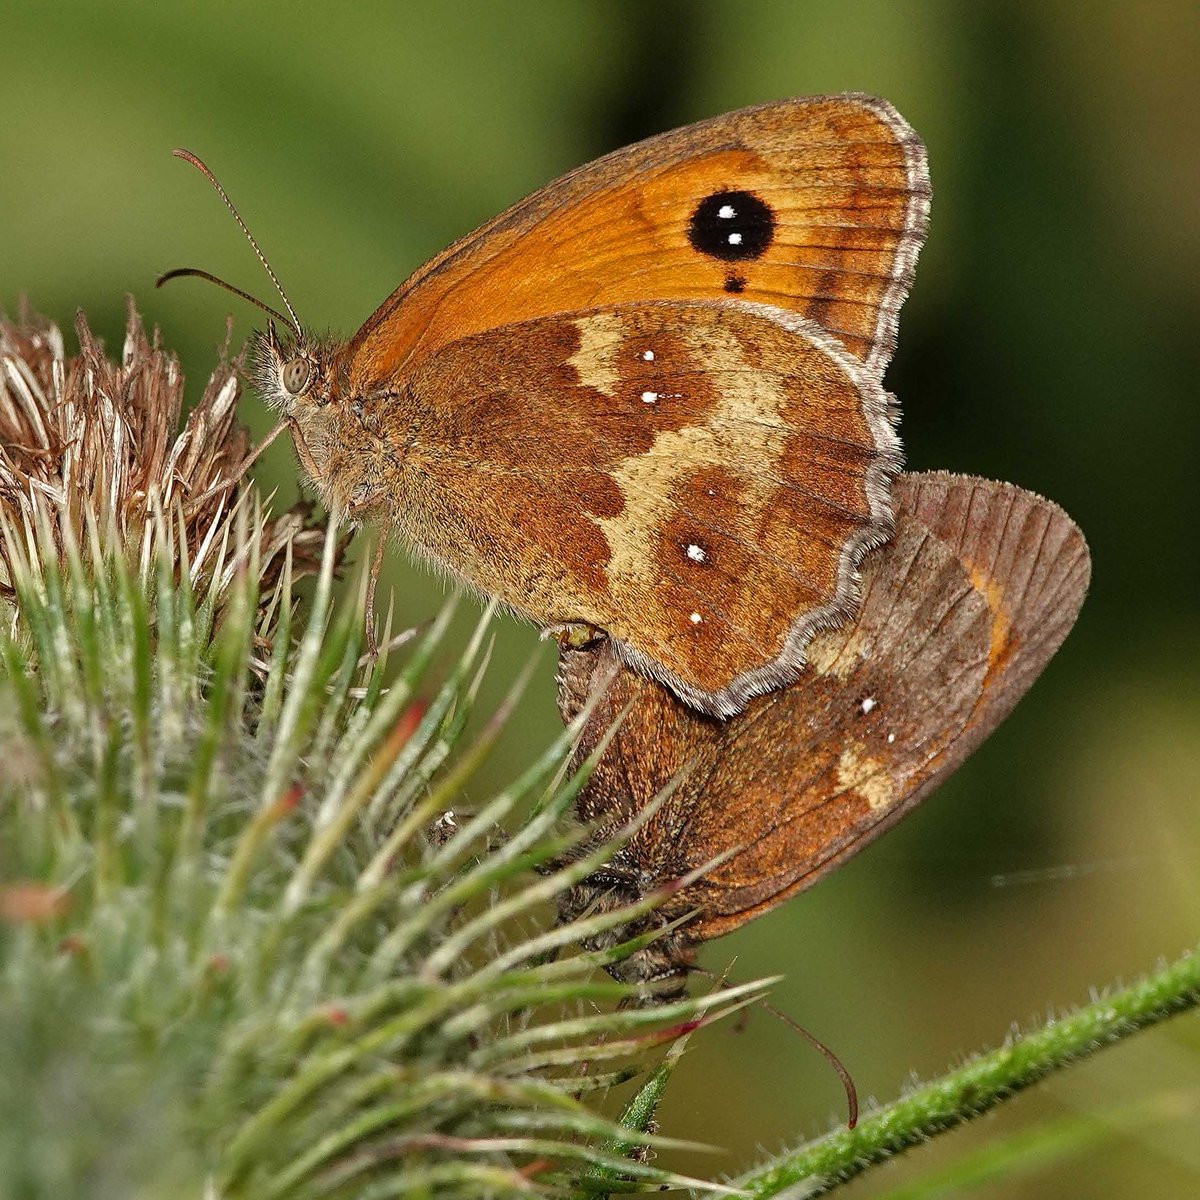 Mating pair of Gatekeeper butterflies on a Spear Thistle head. In our garden yesterday. #BigButterflyCount